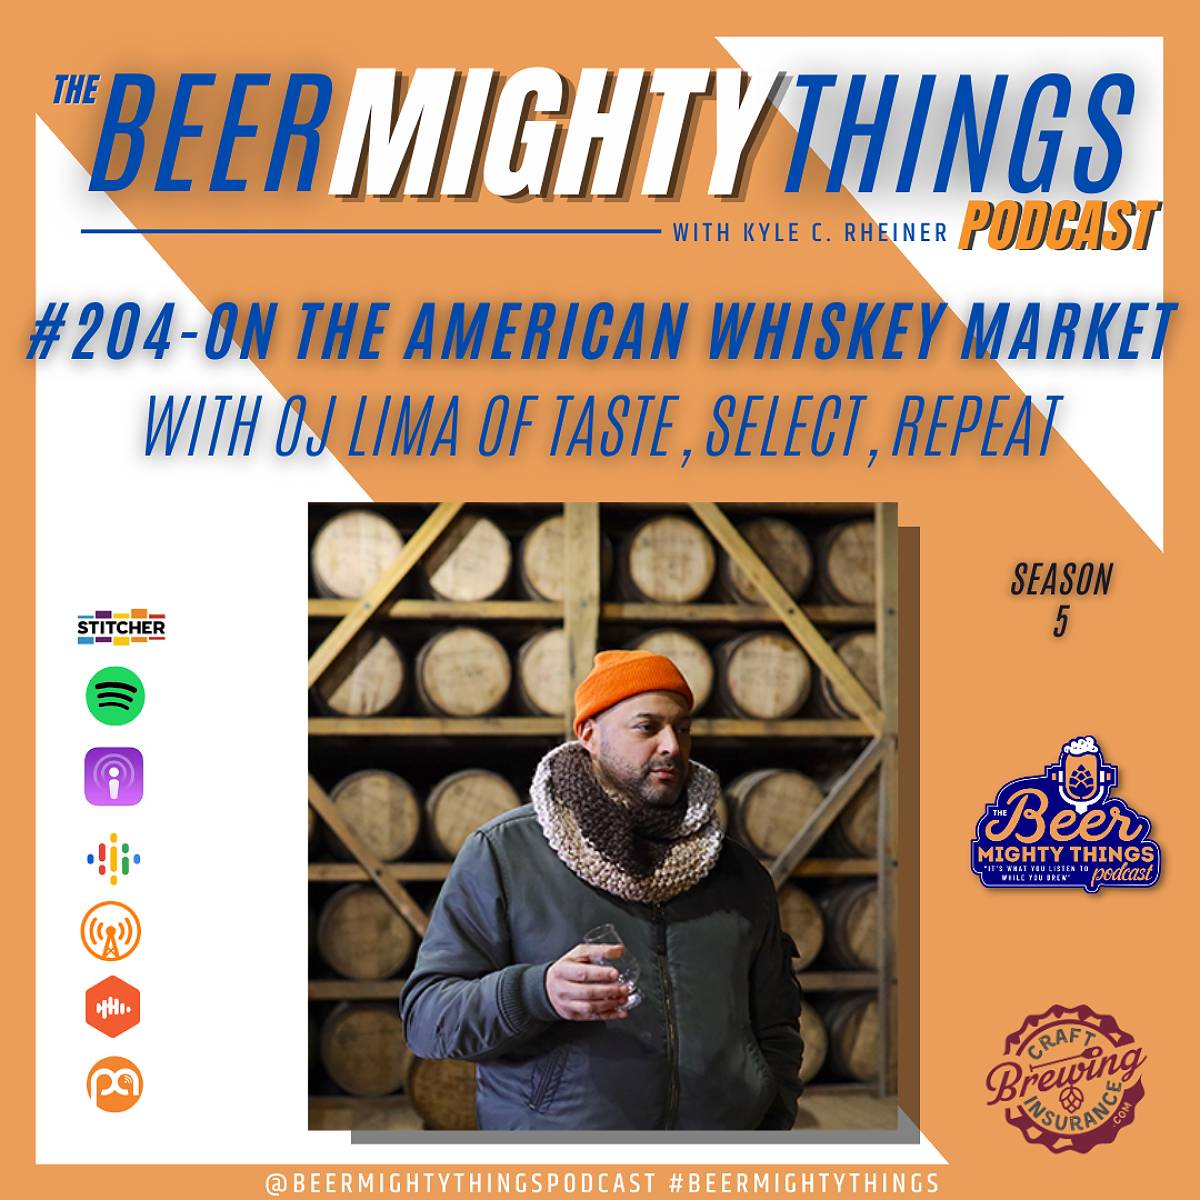 OJ Talks Whiskey On The Beer Mighty Things Podcast